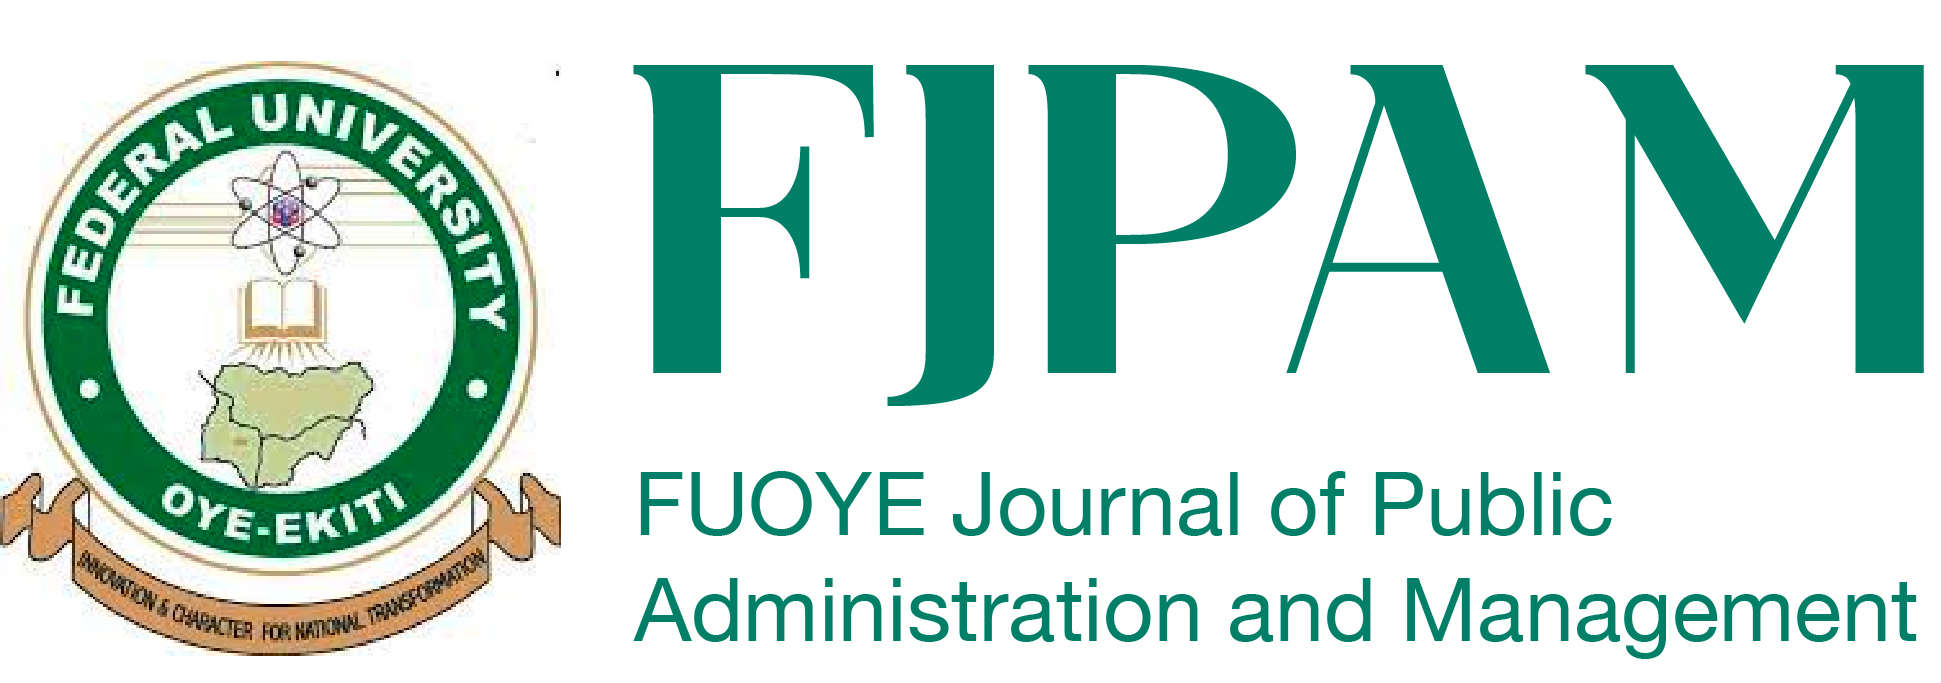  FUOYE JOURNAL OF PUBLIC ADMINISTRATION AND MANAGEMENT